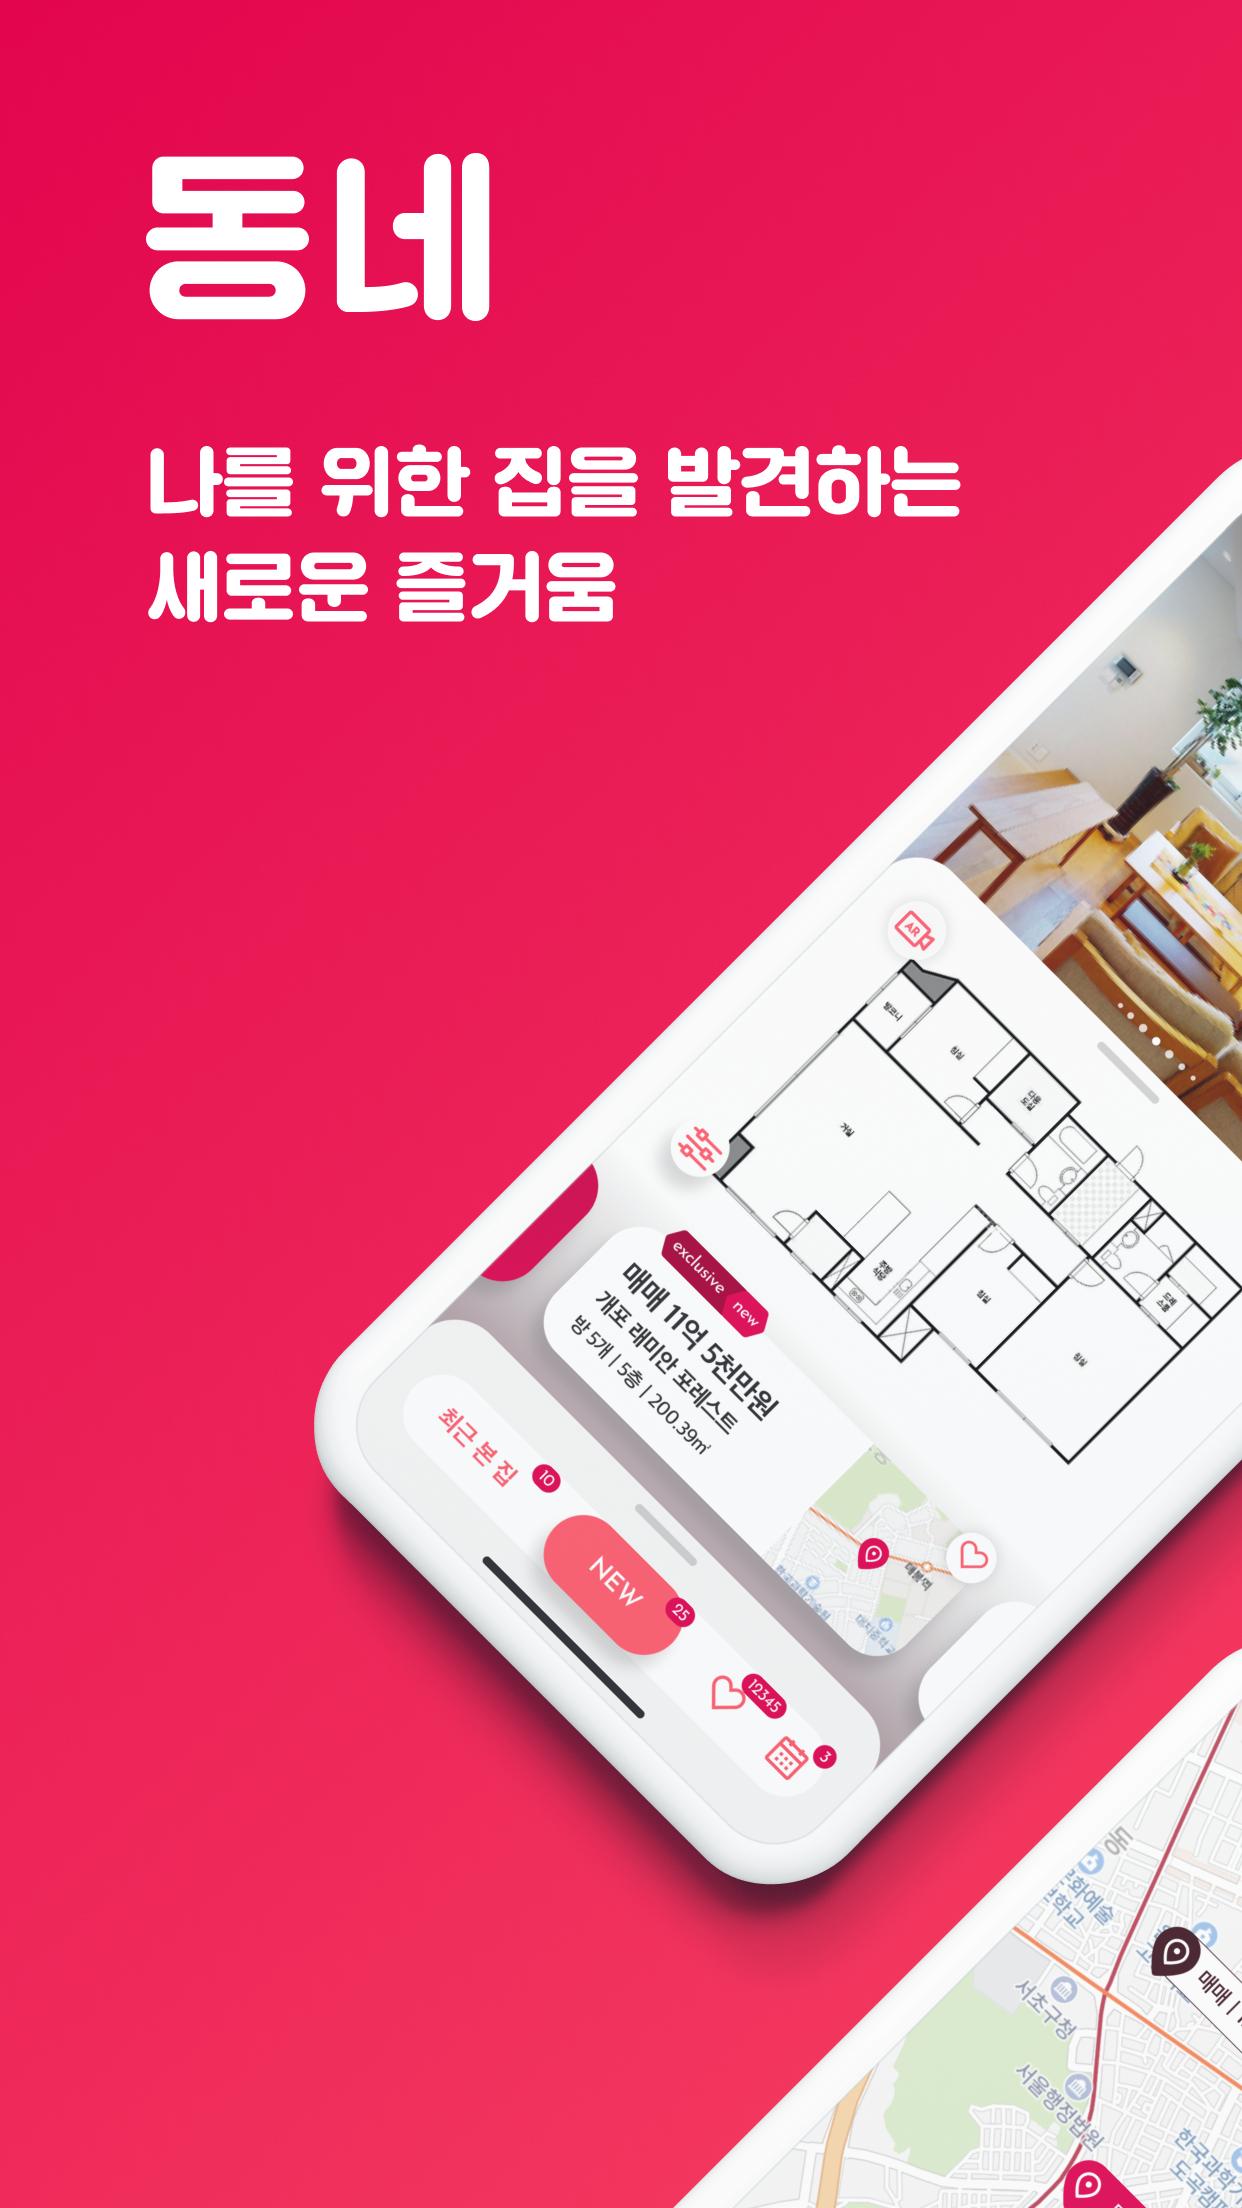 Dongnae Real Estate: Find Your Home 1.0.2 Screenshot 11